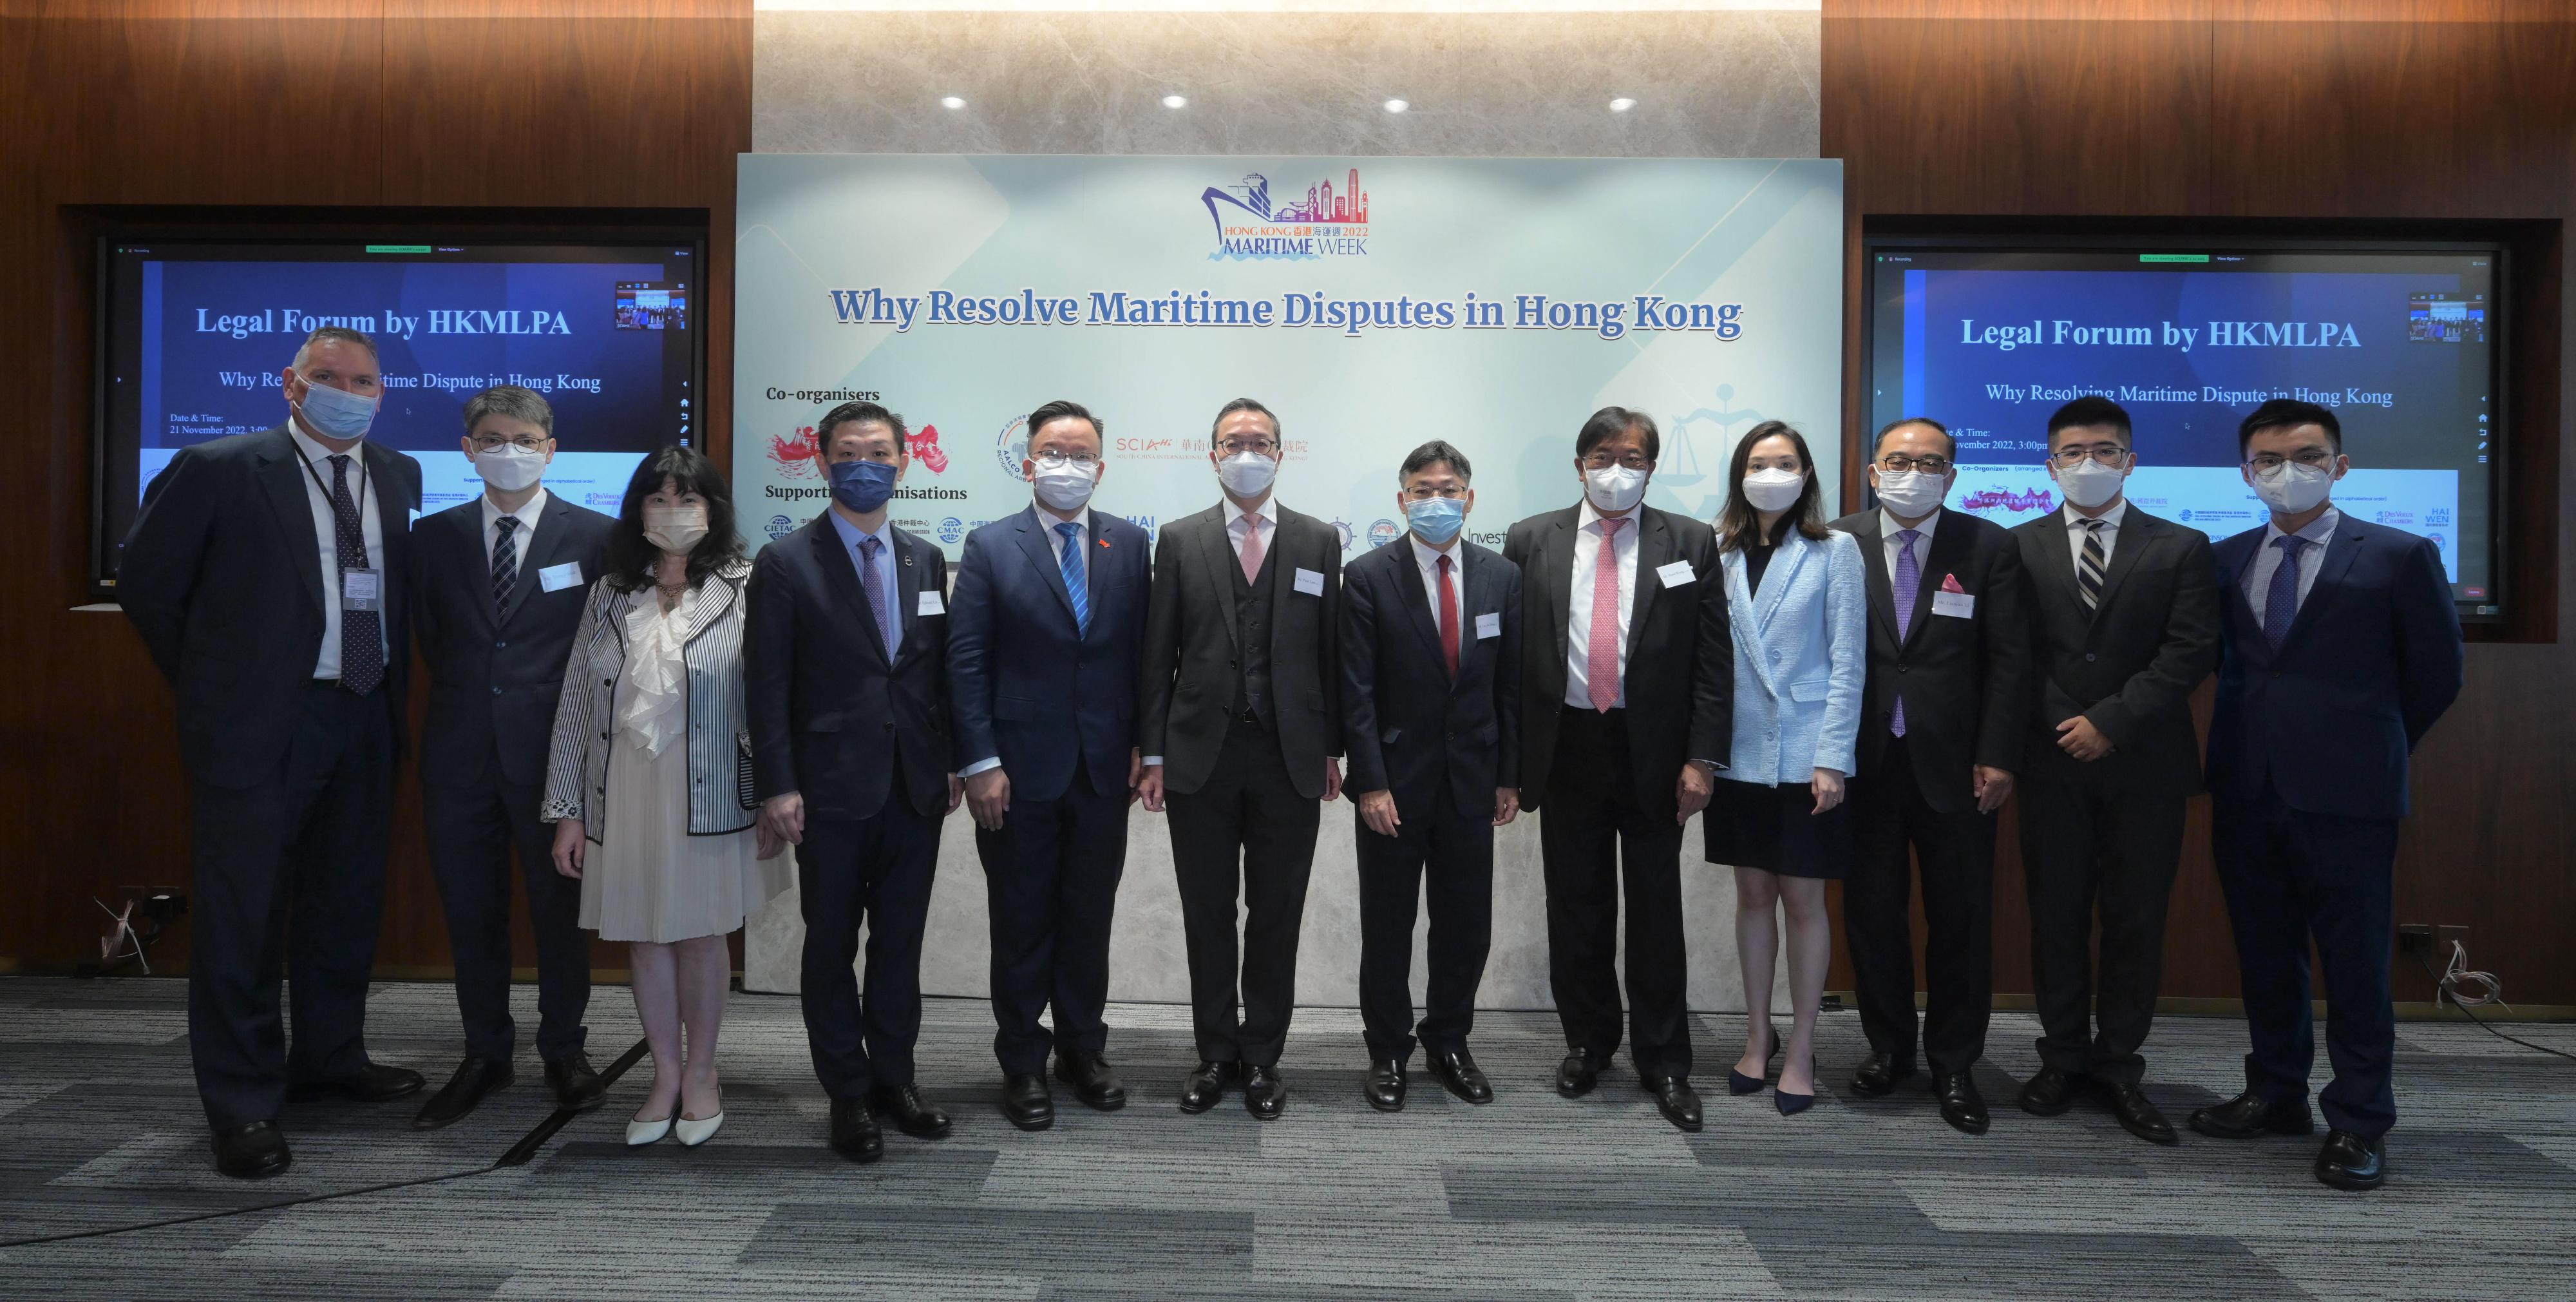 The Why Resolve Maritime Disputes in Hong Kong legal forum under Hong Kong Maritime Week 2022 was held today (November 21). Photo shows the Secretary for Justice, Mr Paul Lam, SC (sixth left); the Secretary for Transport and Logistics, Mr Lam Sai-hung, (sixth right); the Director of the Asian-African Legal Consultative Organization Hong Kong Regional Arbitration Centre, Mr Nick Chan (fifth left); the Executive Chairman of the South China International Arbitration Center (Hong Kong), Mr Huen Wong (fifth right), and other guests at the forum.